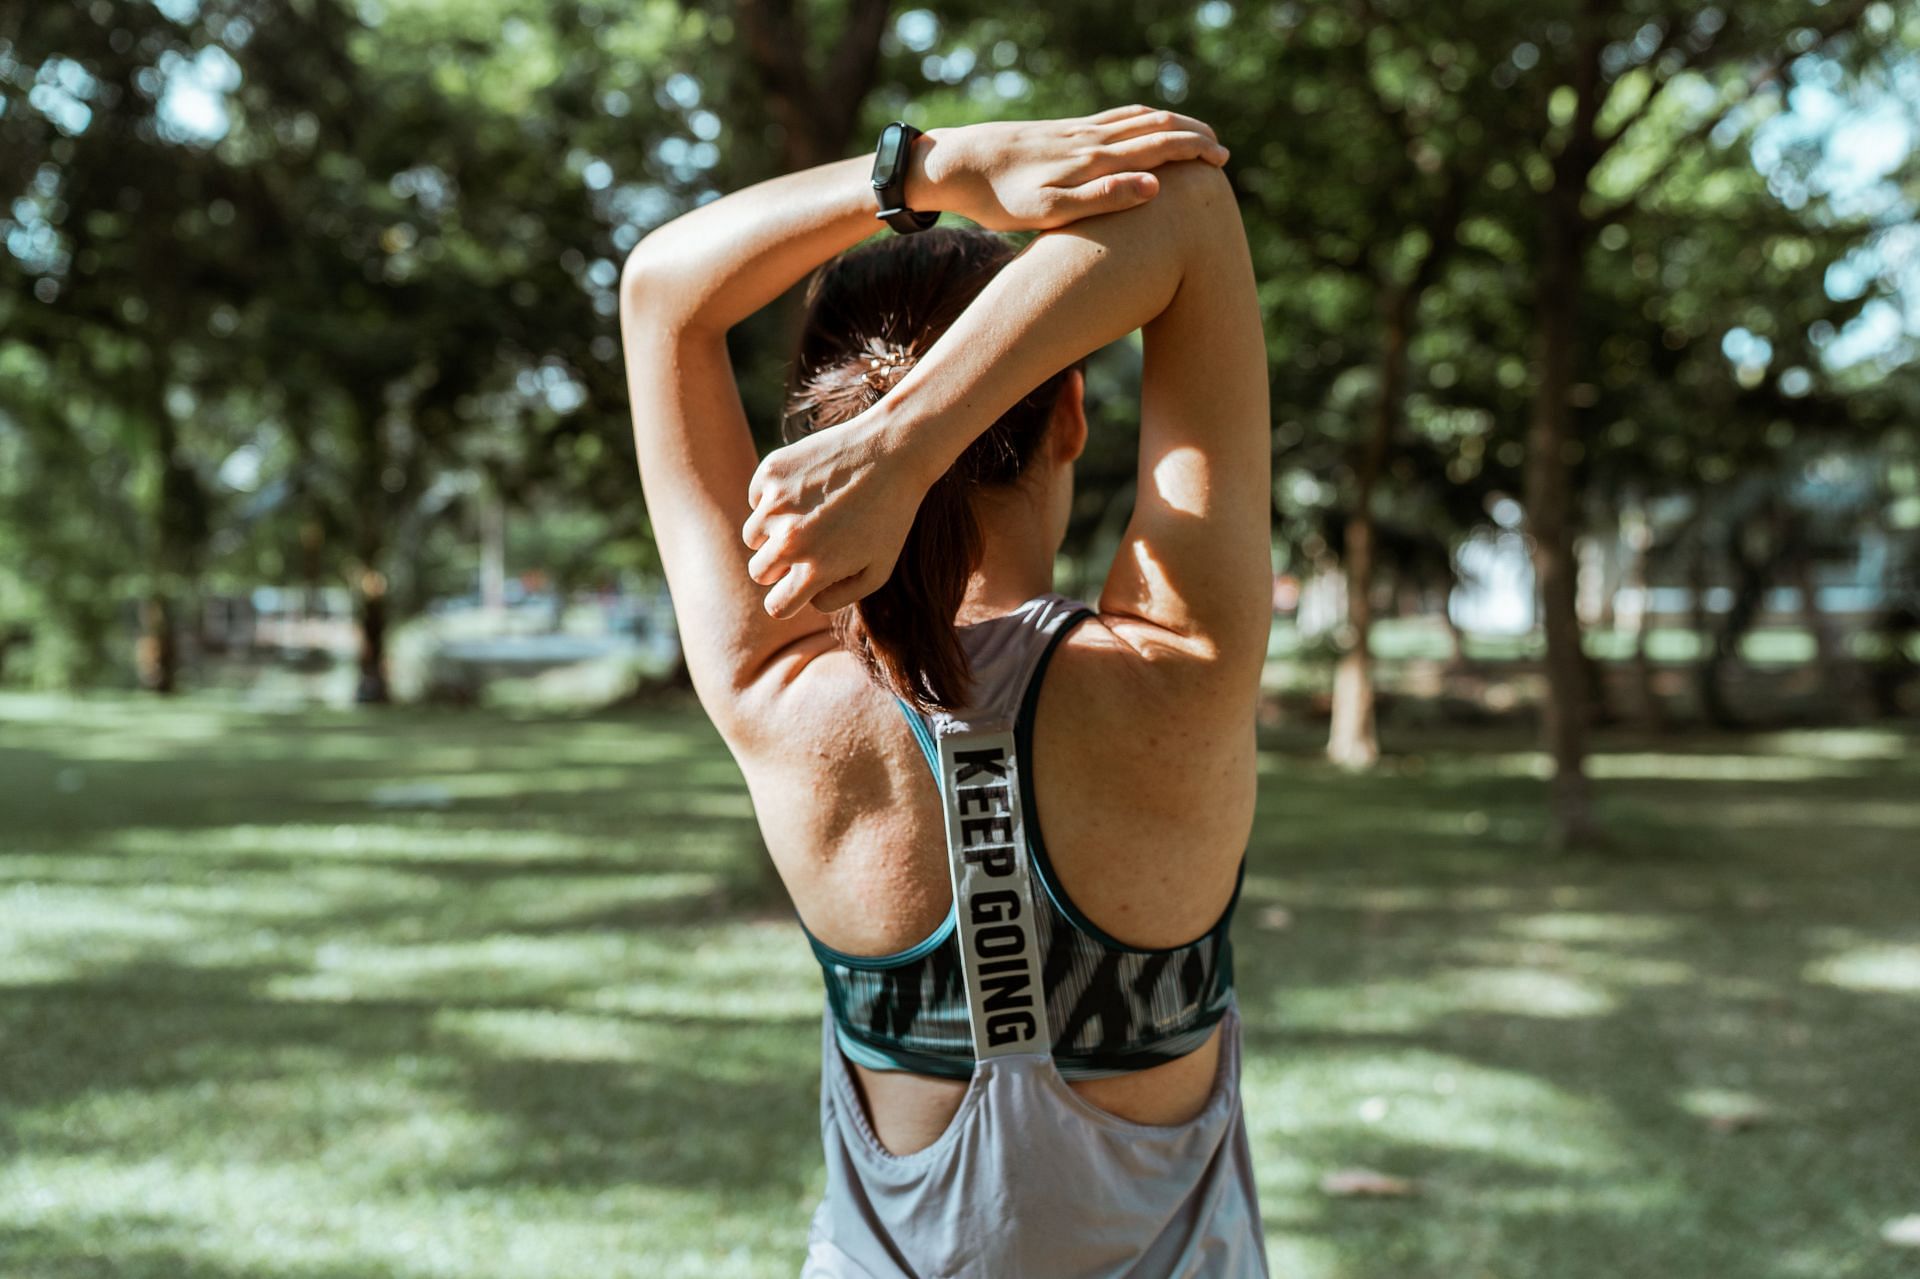 Arm circles are a good, beginner-level exercise to tone your arms (Image via Pexels@Ketut Subiyanto)